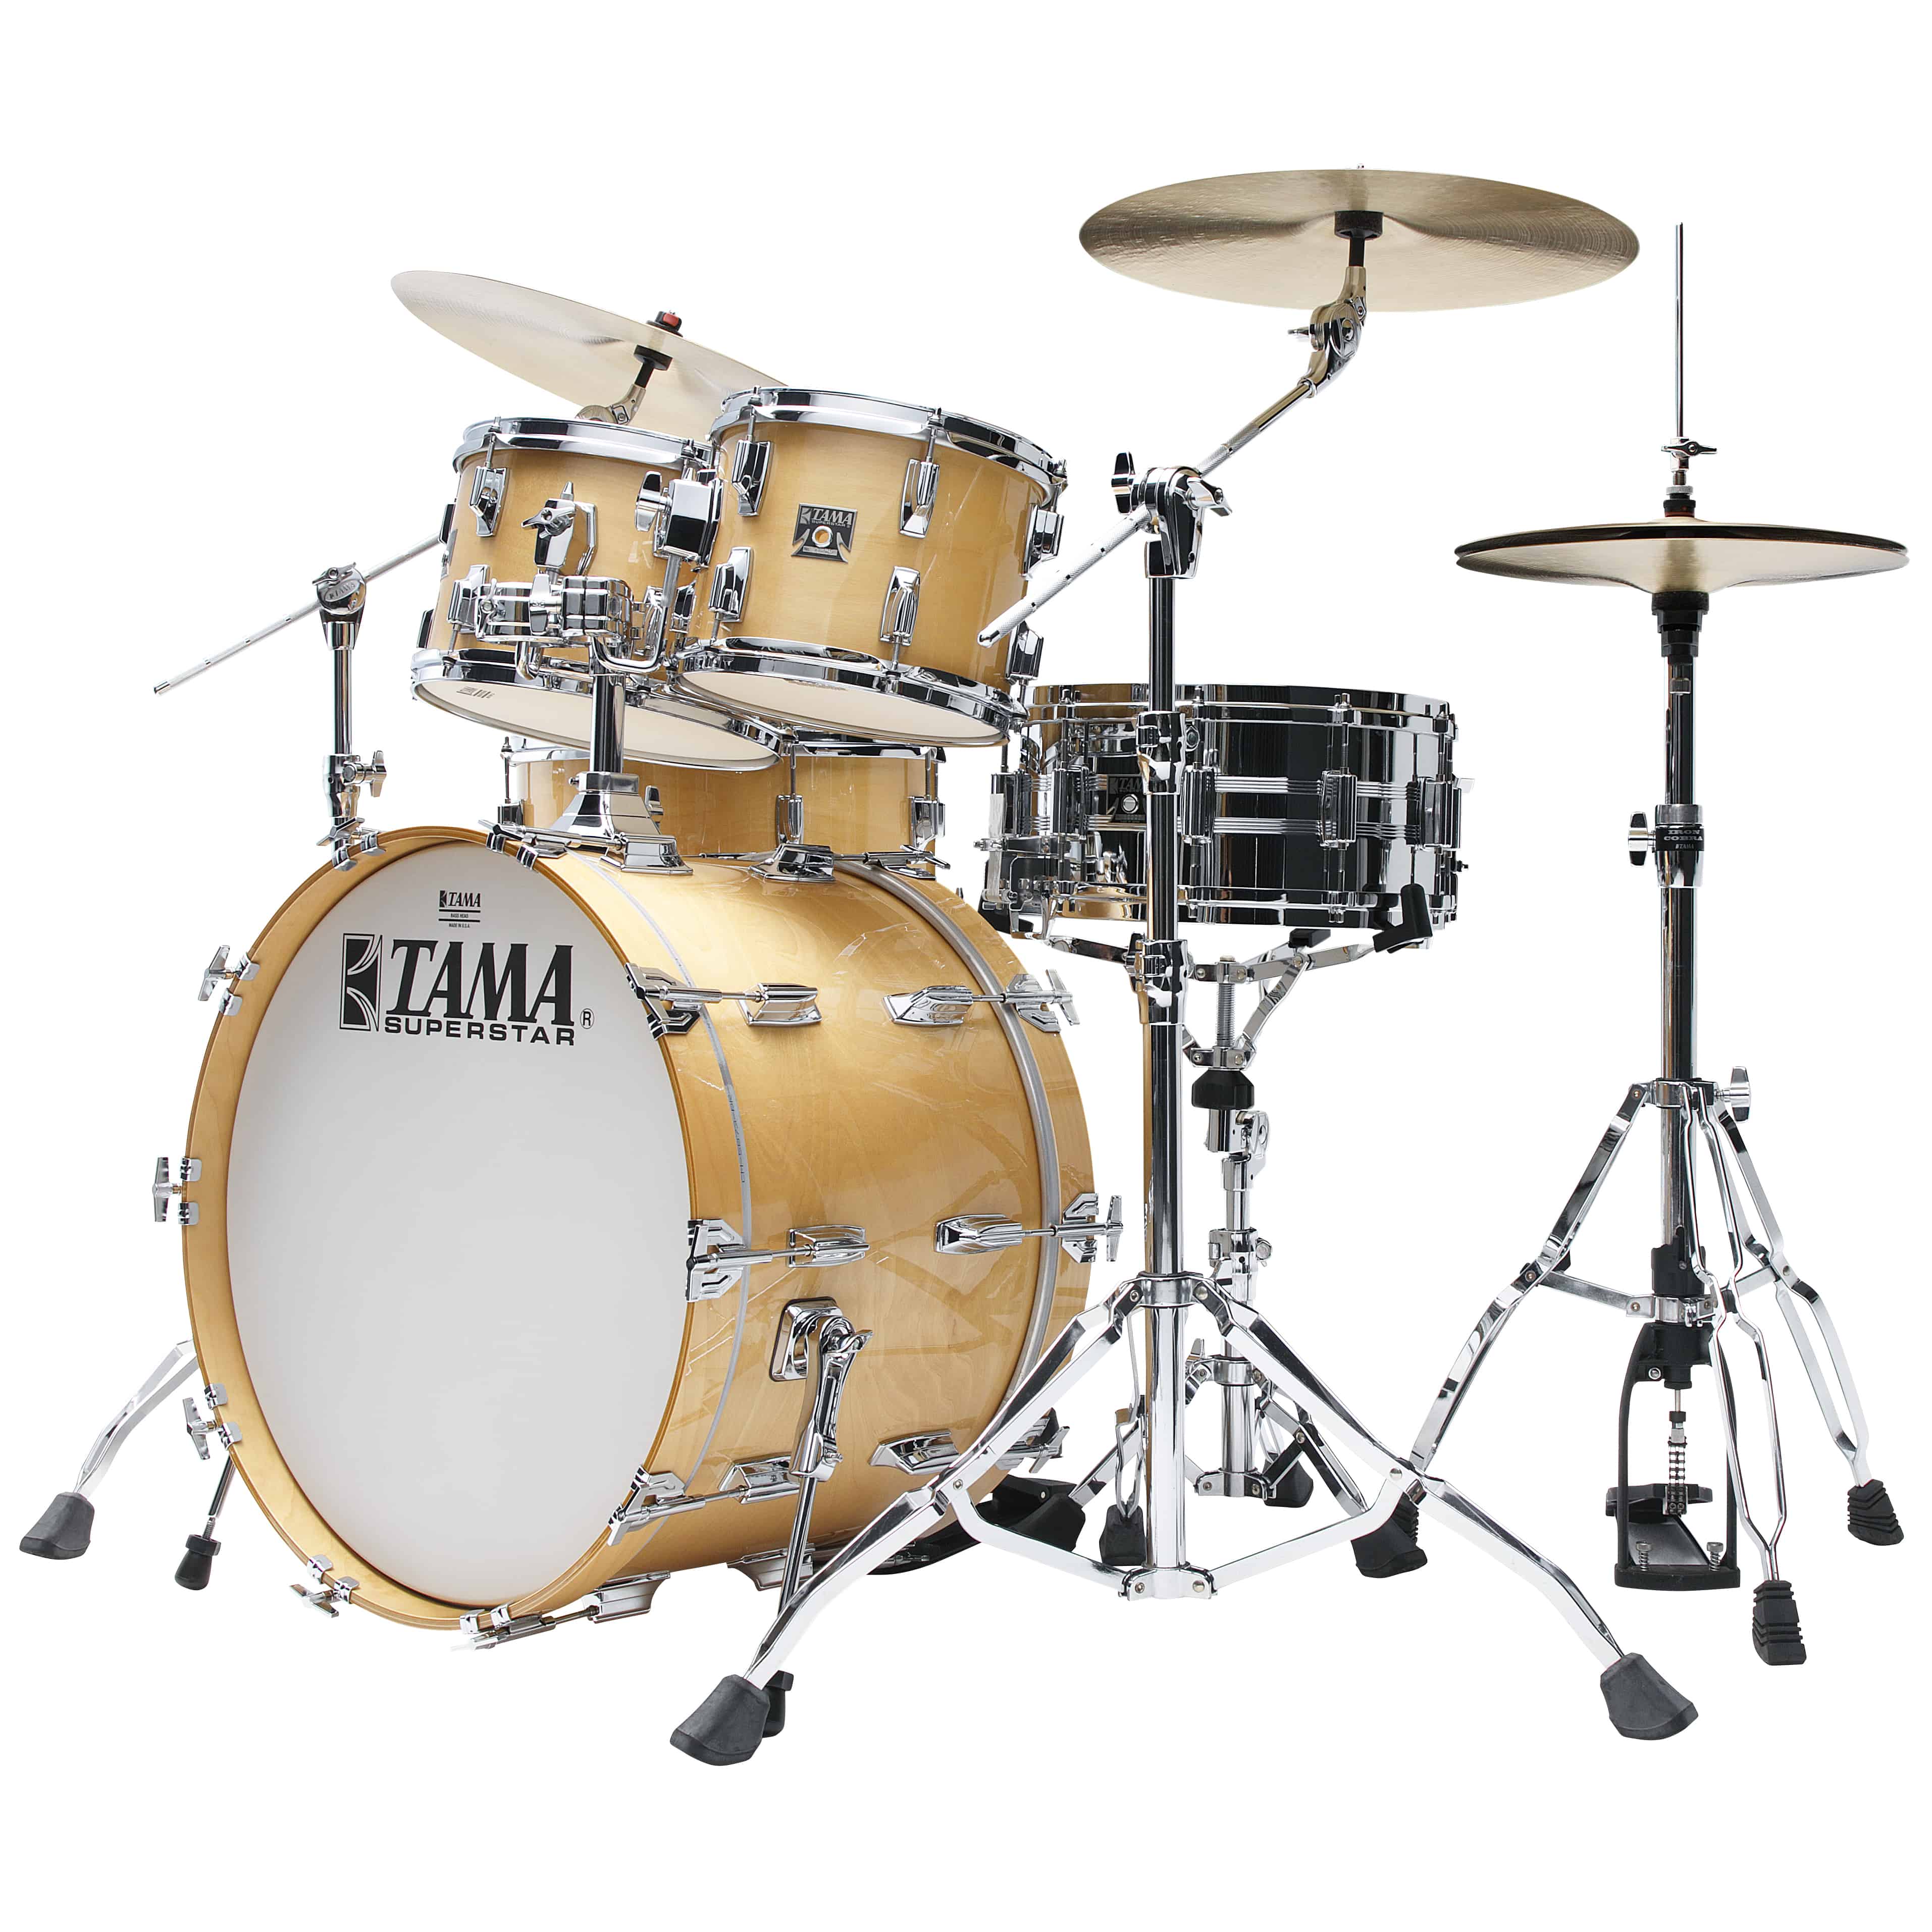 Tama SU42RS-SPM - 50th LIMITED Superstar Reissue 4pcs Drum Shell Kit - Super Maple 6